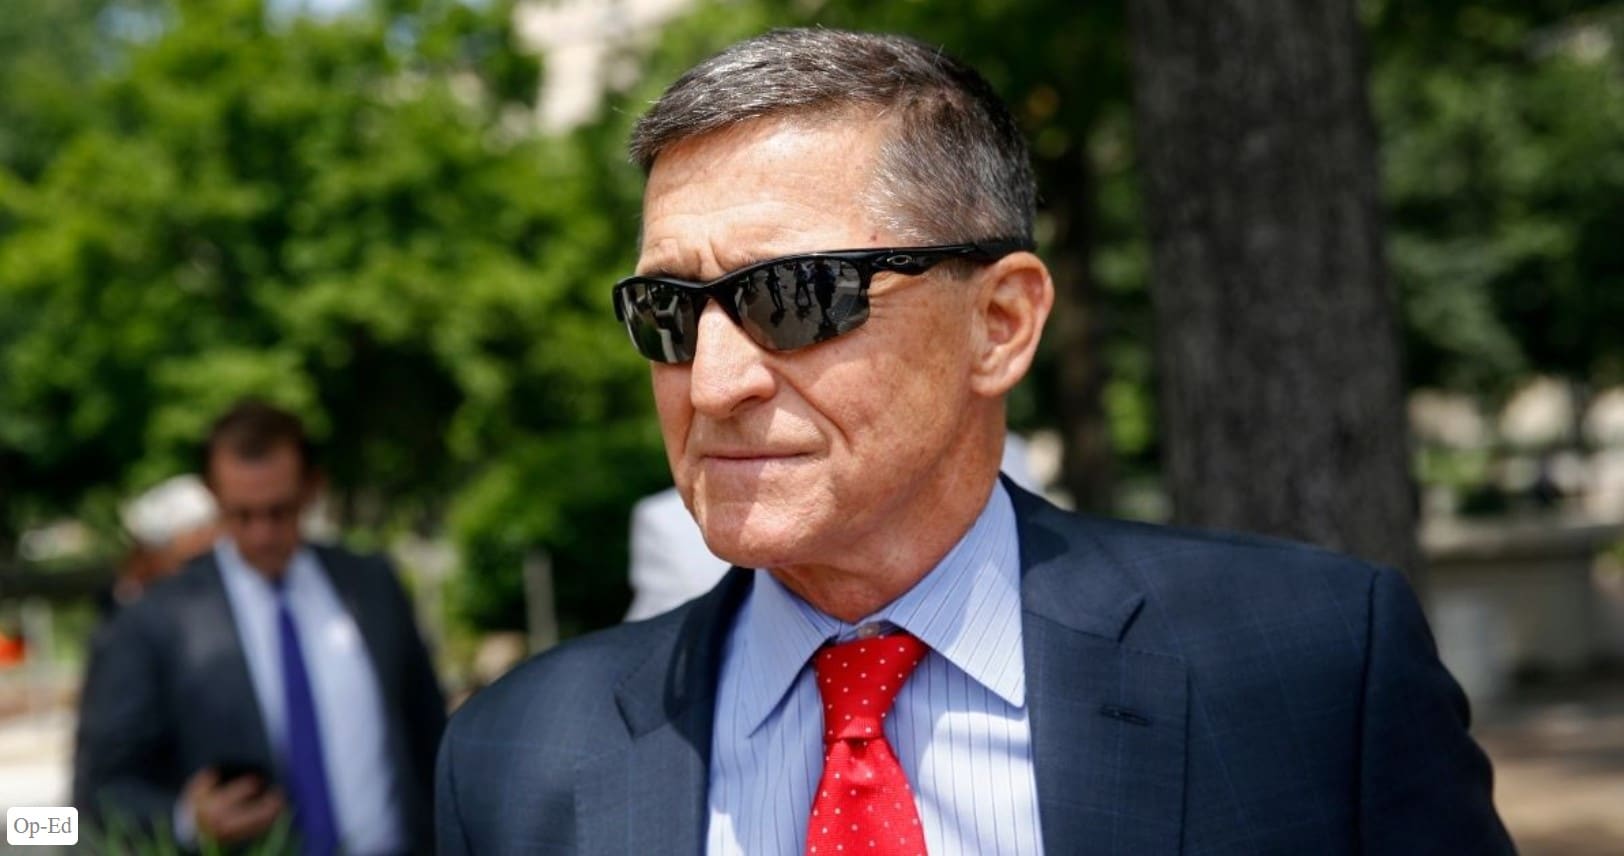 General Flynn Western Journal Father's Day Challenge